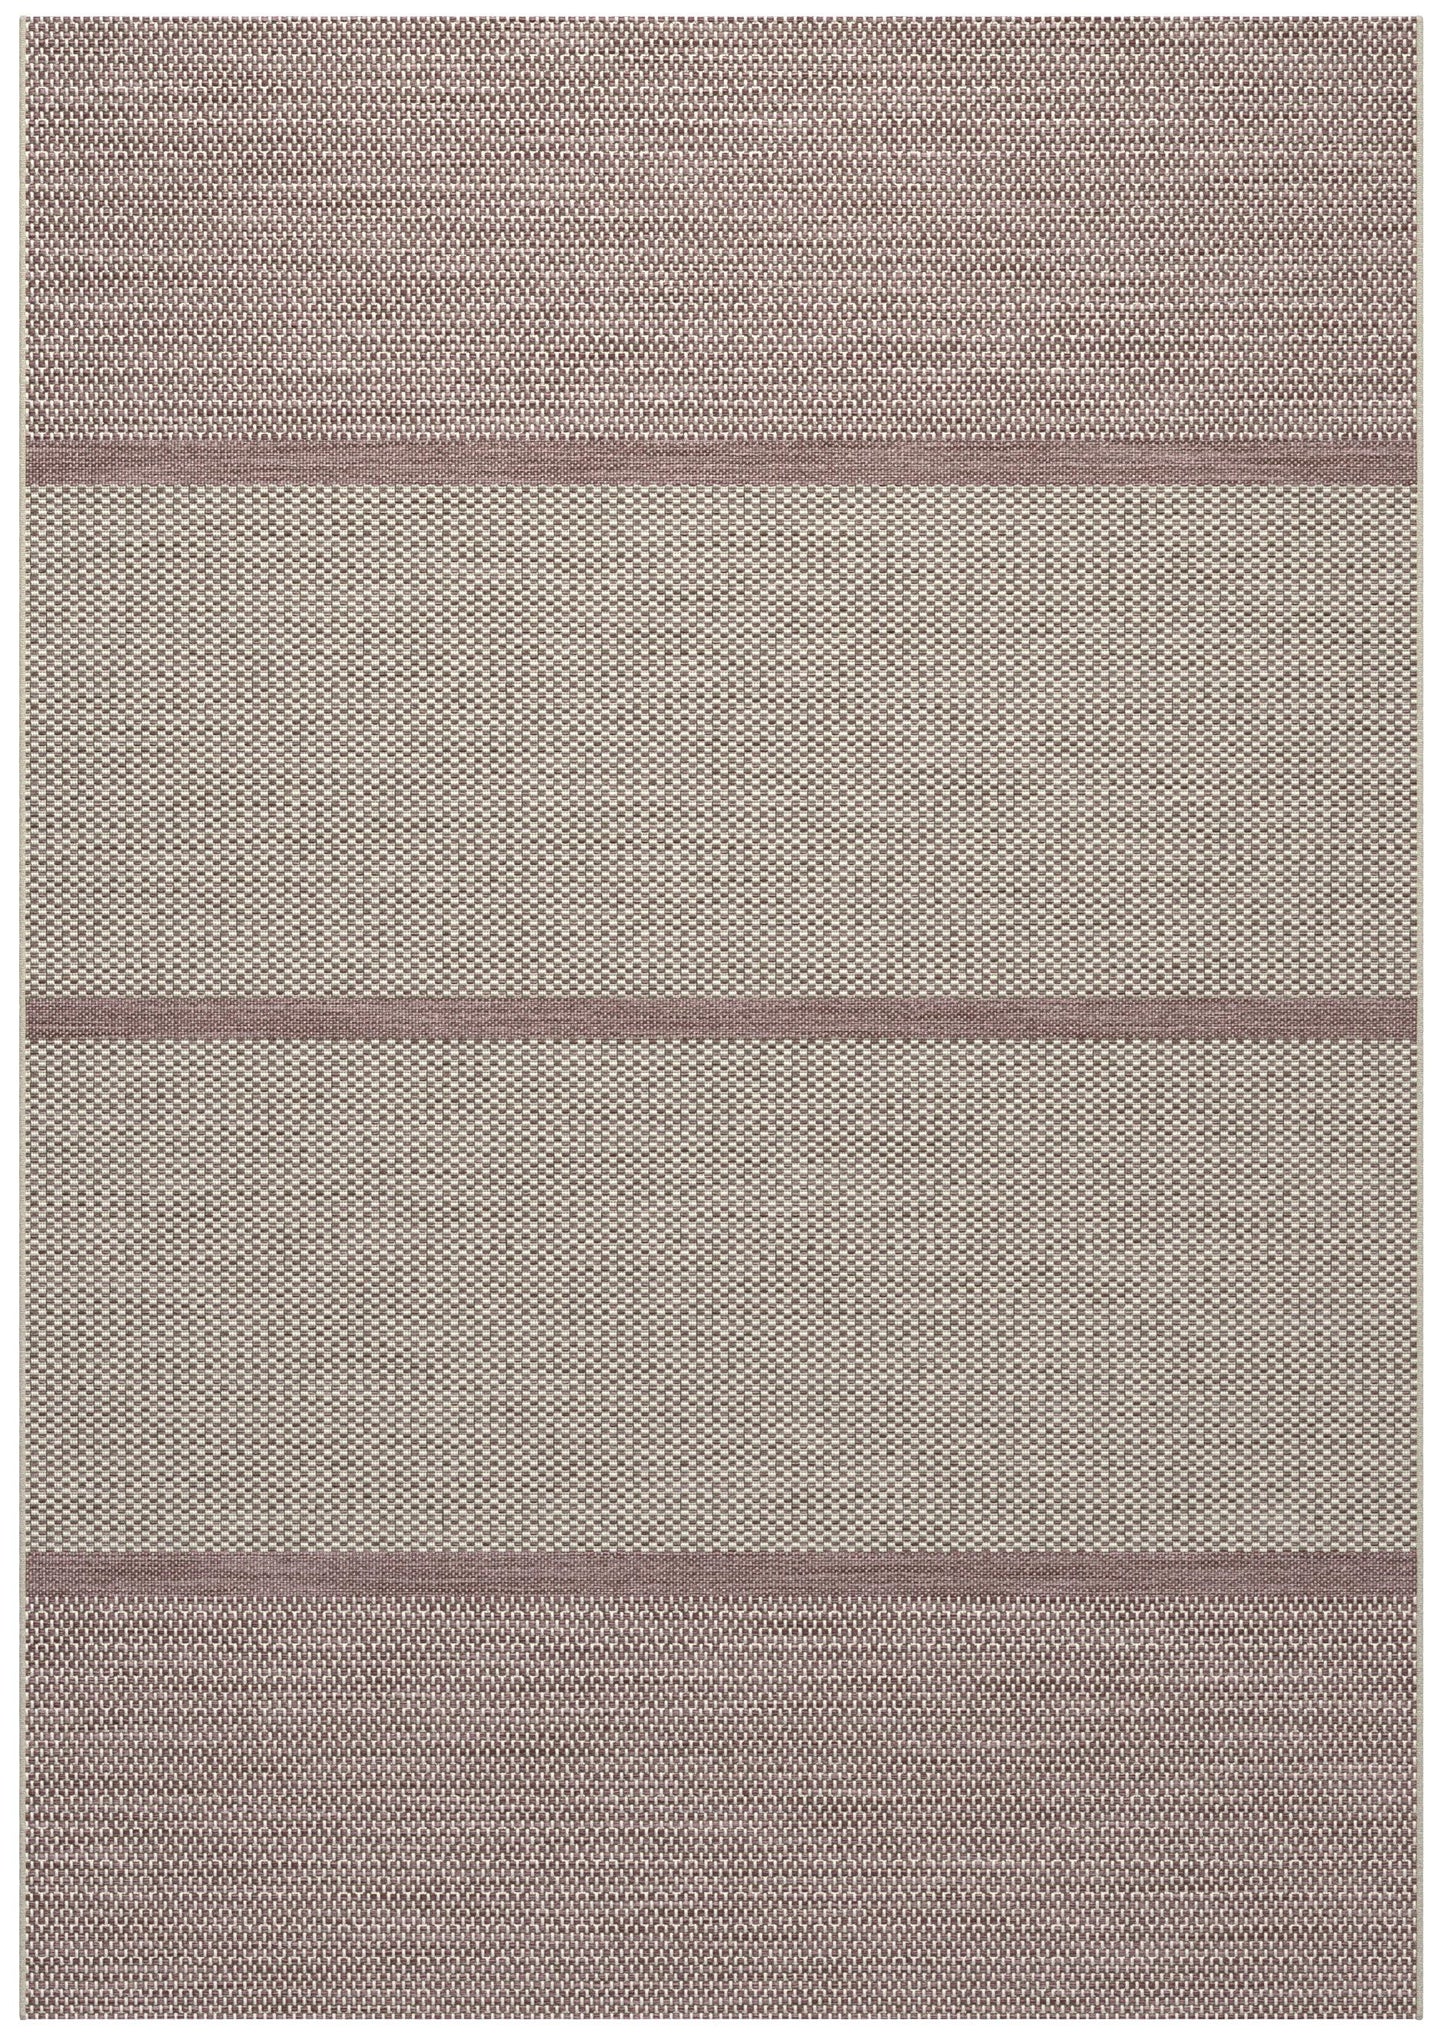 5X8 Area Rug Striped White and Plum Indoor / Outdoor Polypropylene